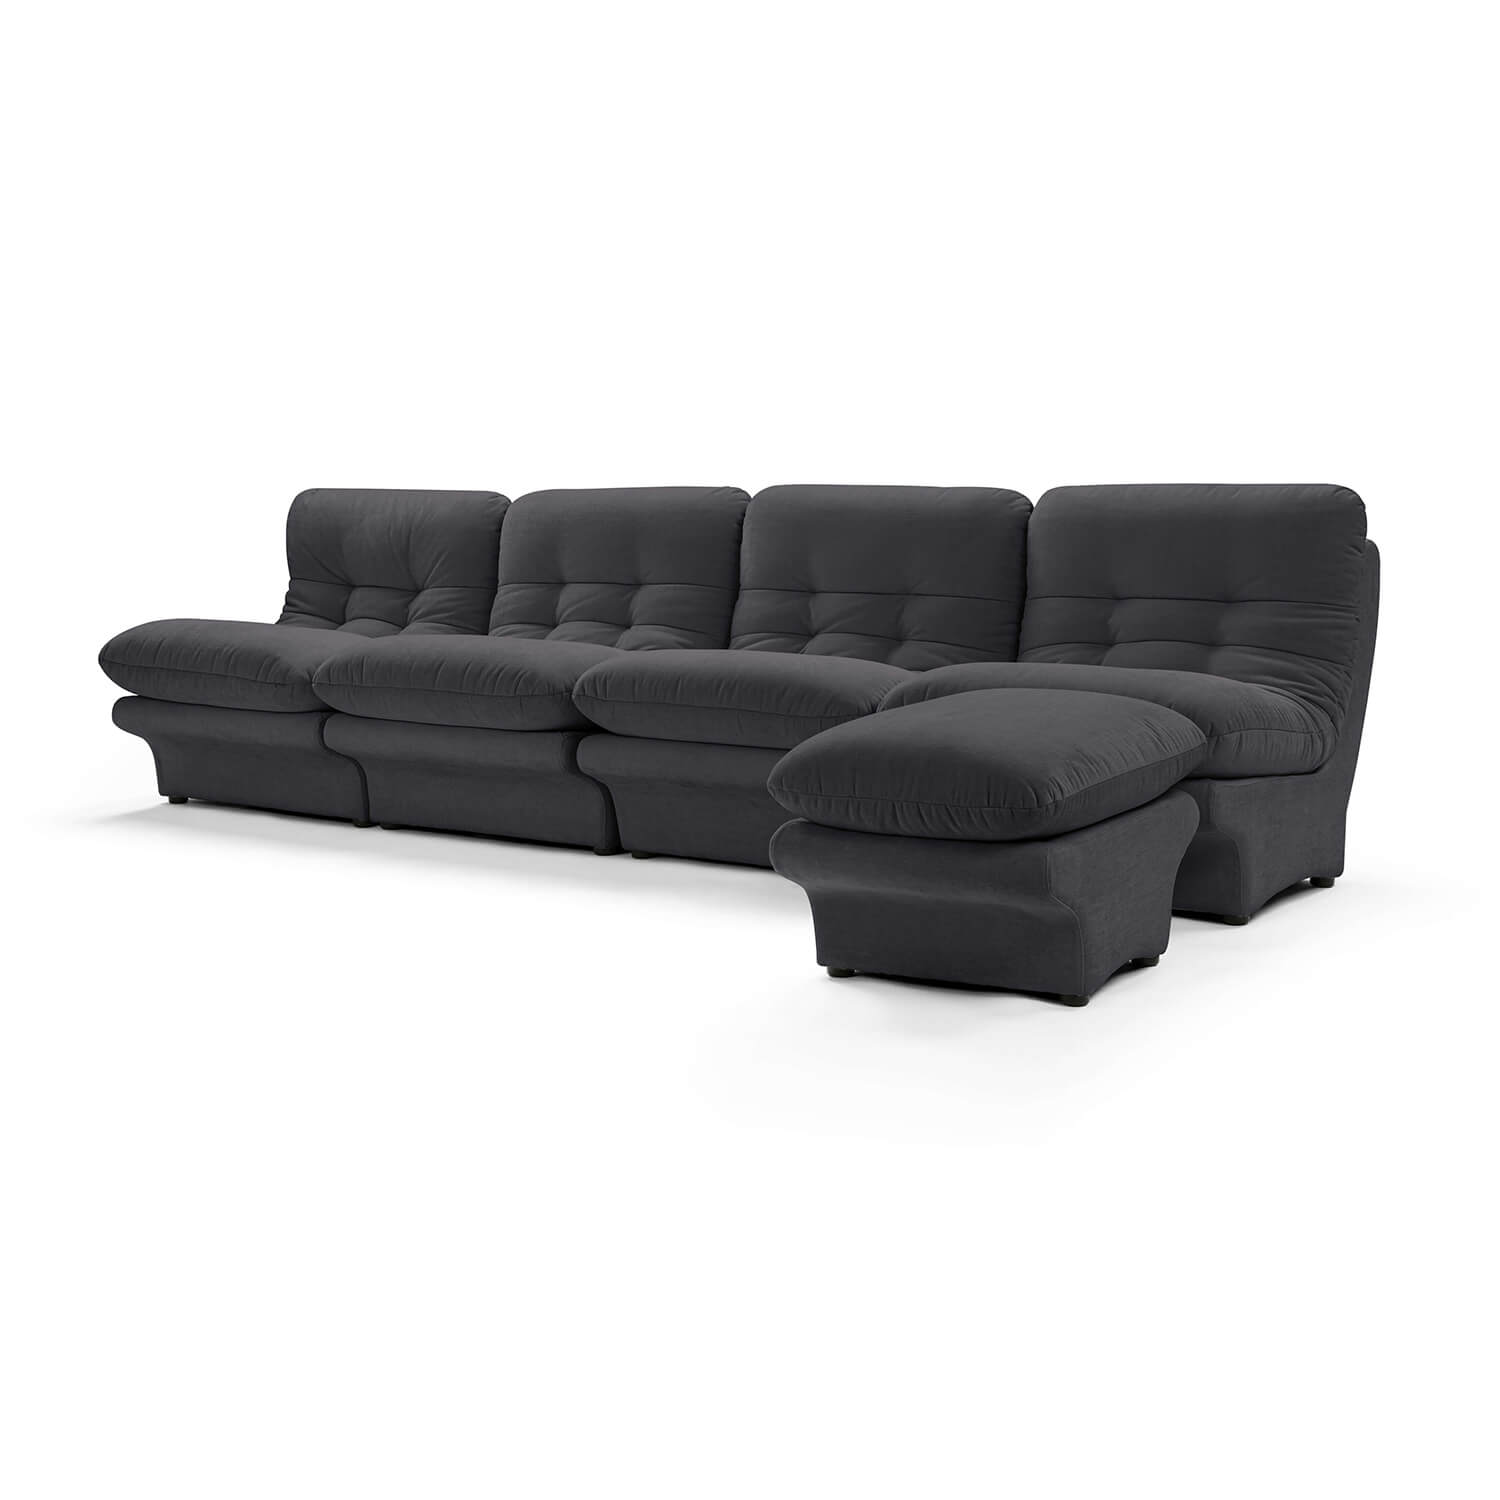 Carsons Mid Century Curved Modular Sectional Sofa / Combination 002 Performance Felt-Ink